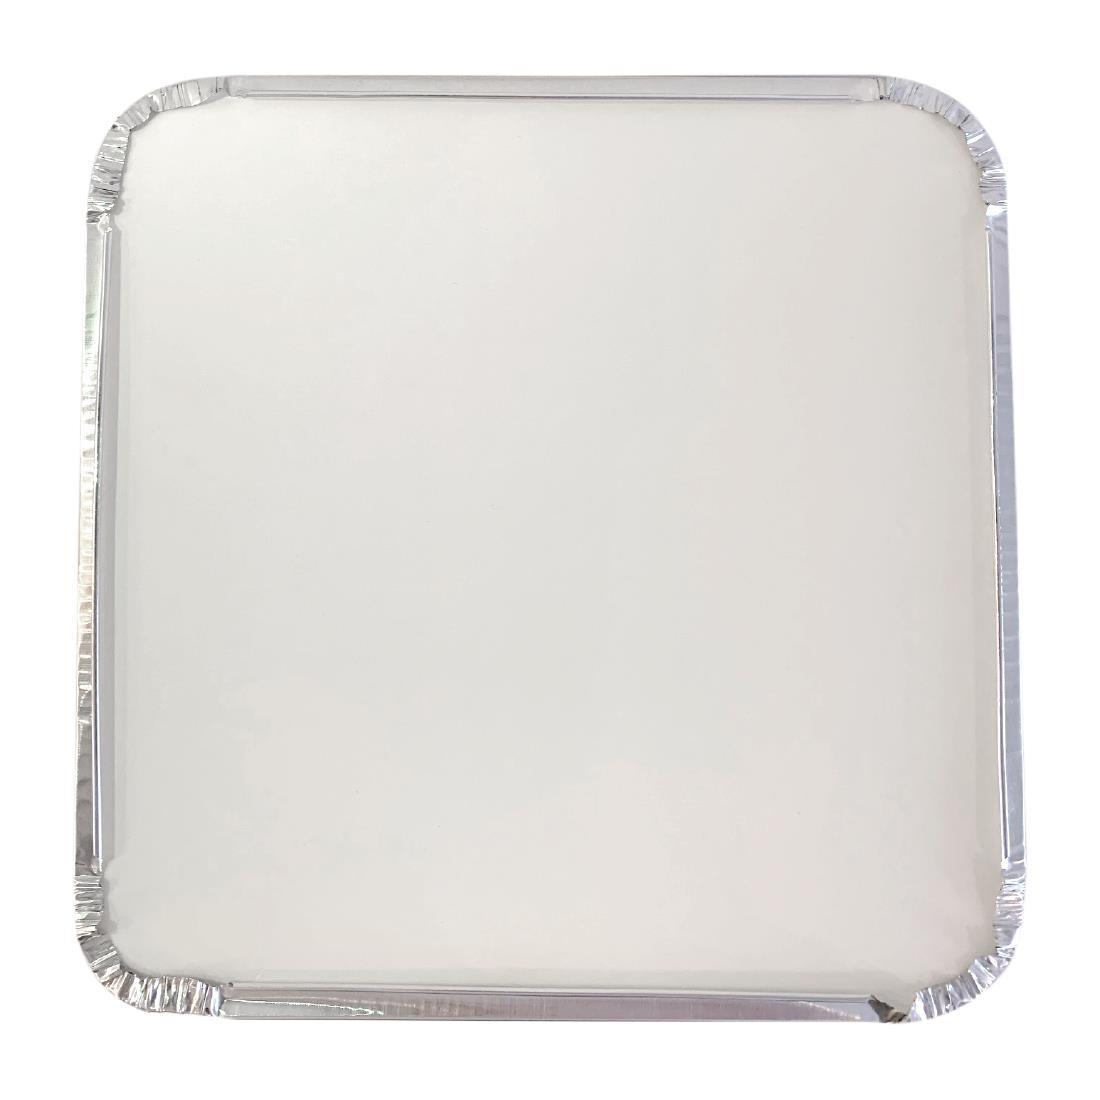 Paper Lid for Deep and Shallow Foil Containers (Pack of 200) - FJ855  - 1